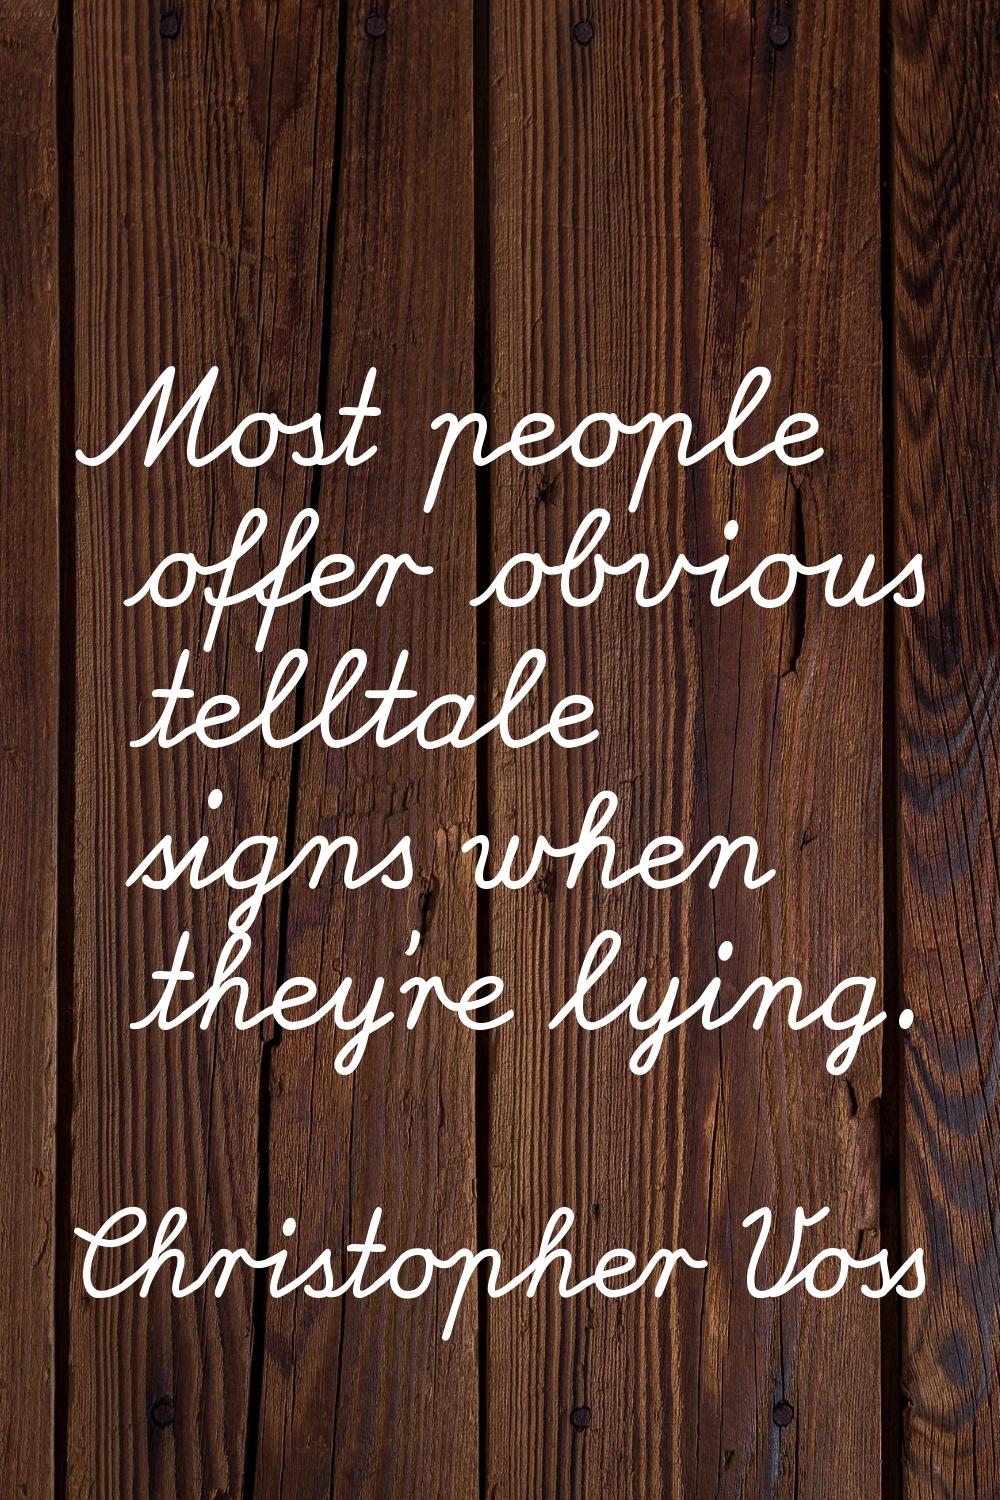 Most people offer obvious telltale signs when they're lying.